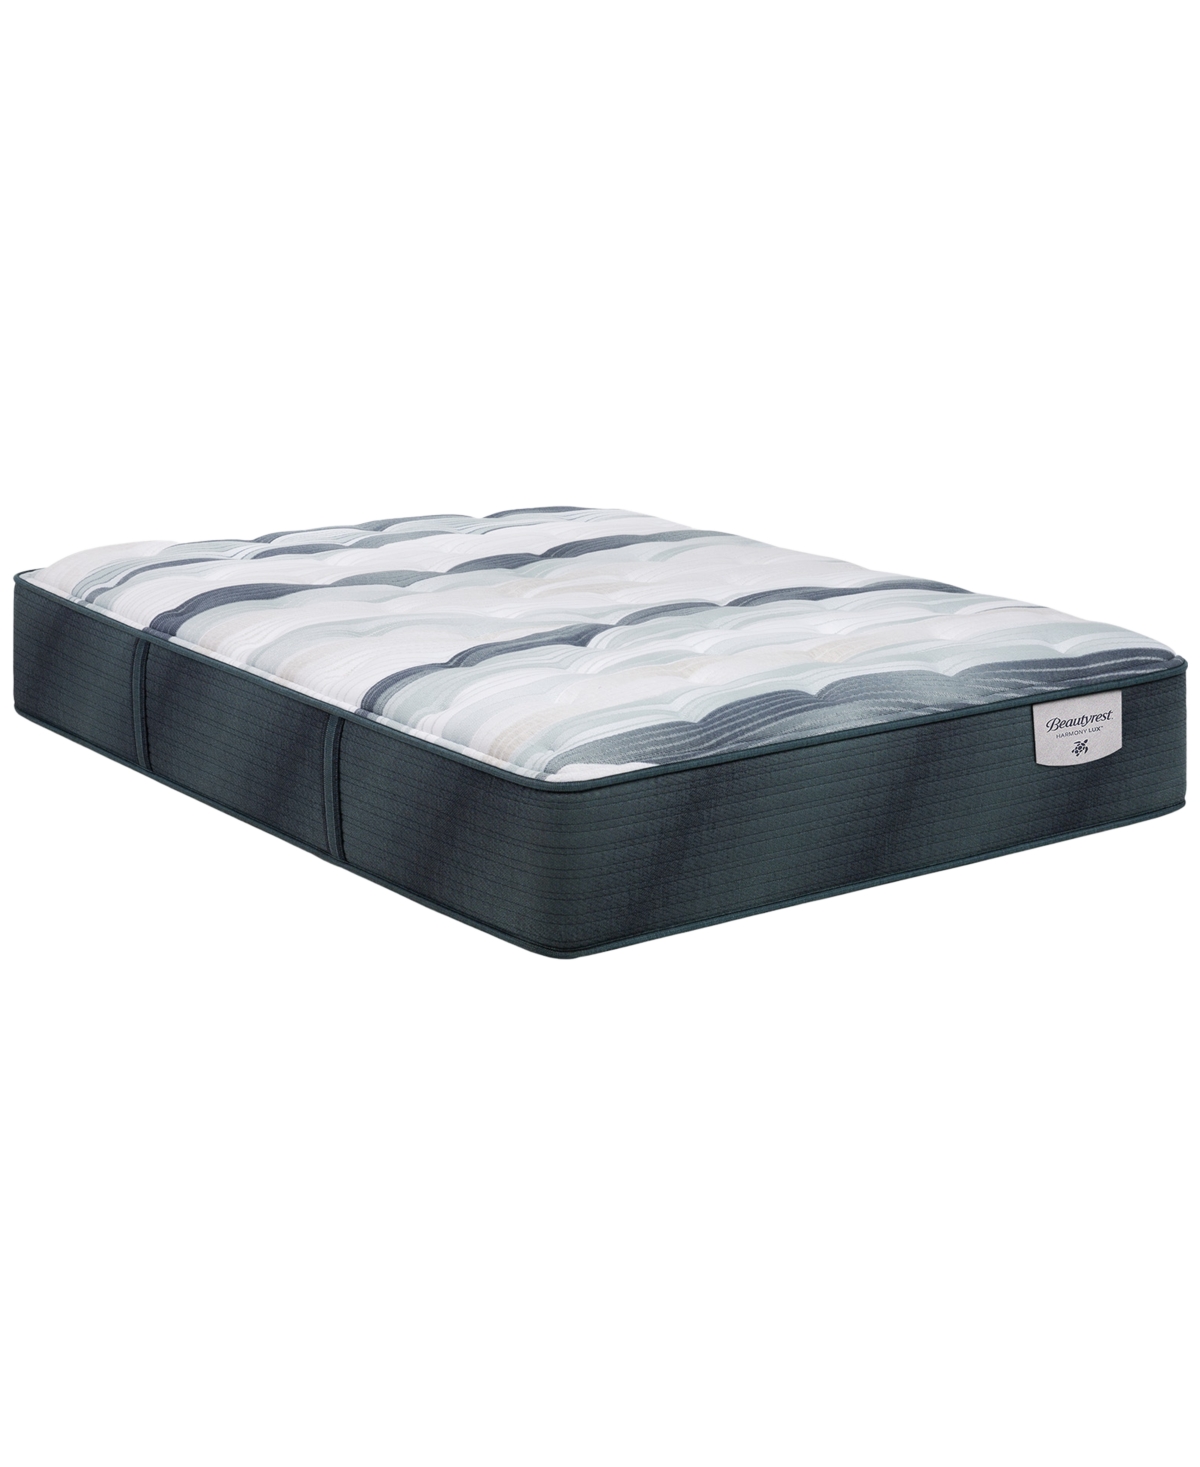 Beautyrest Harmony Lux Coral Island 13.75" Medium Mattress Set In No Color